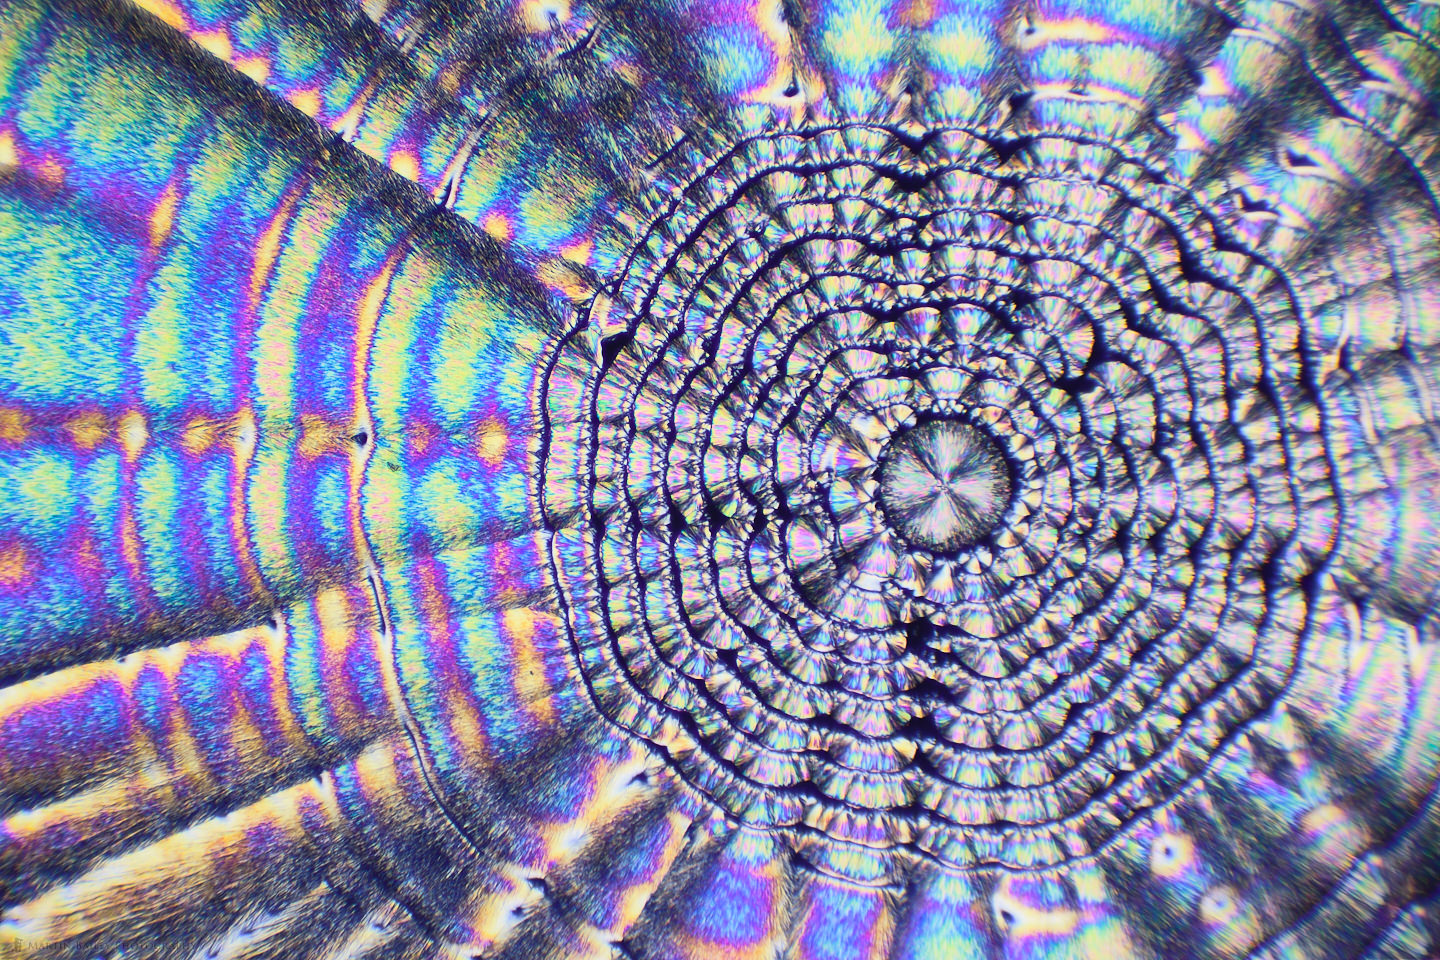 Scaly Disk (Vitamin C Crystals 100X 20 Frames)